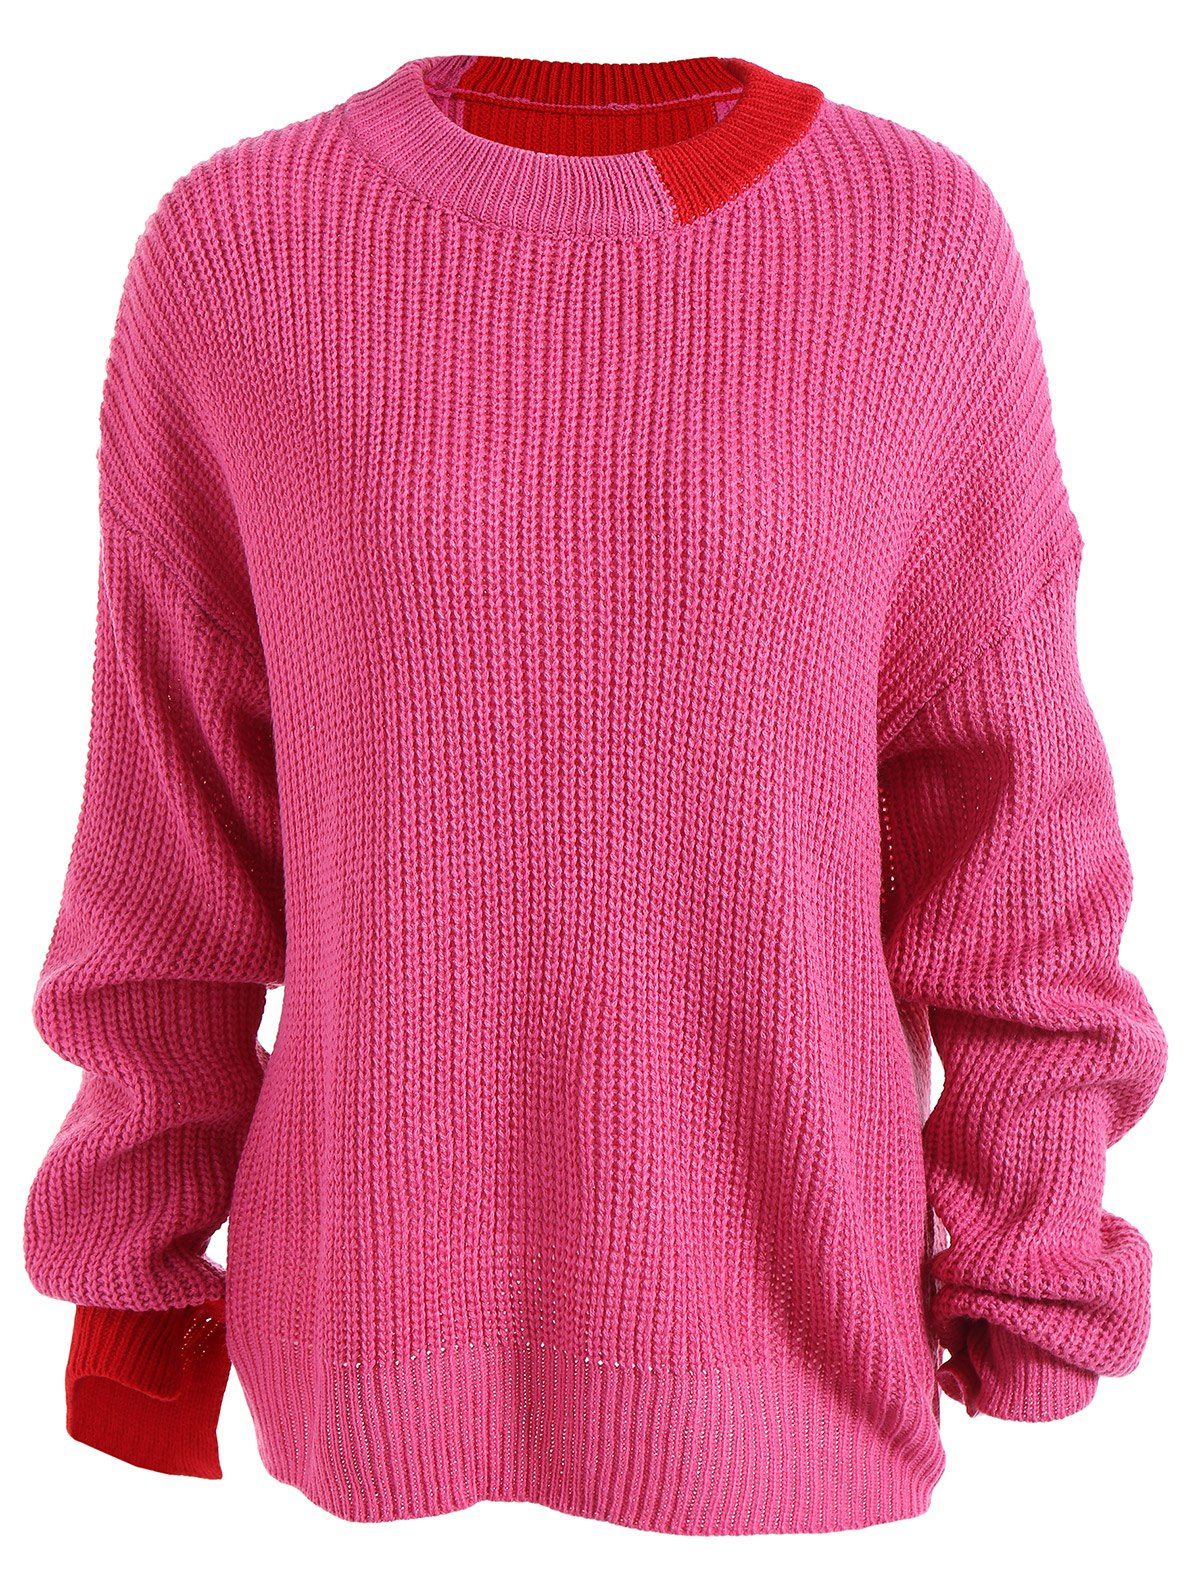 Loose Drop Shoulder Sweater - ROSE RED ONE SIZE